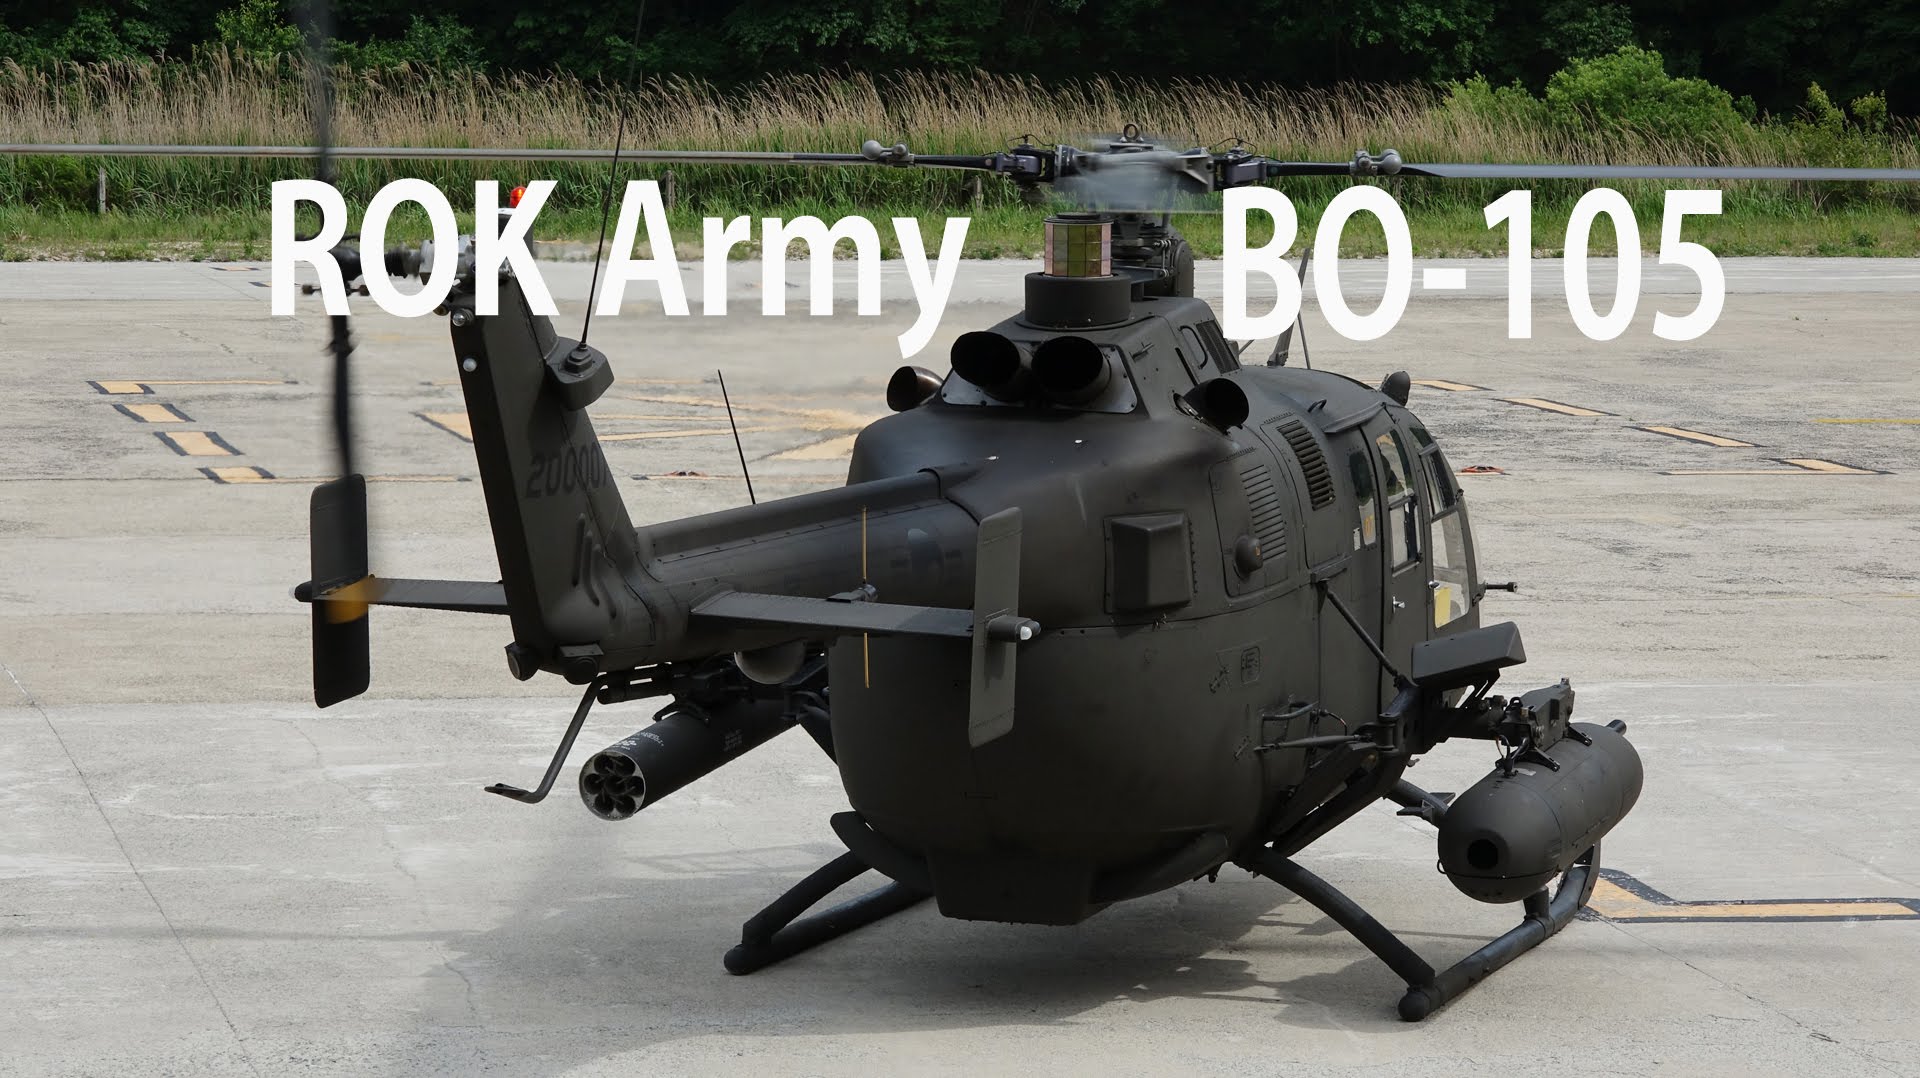 ROK Army Bo 105 KLH Light Attack Helicopter